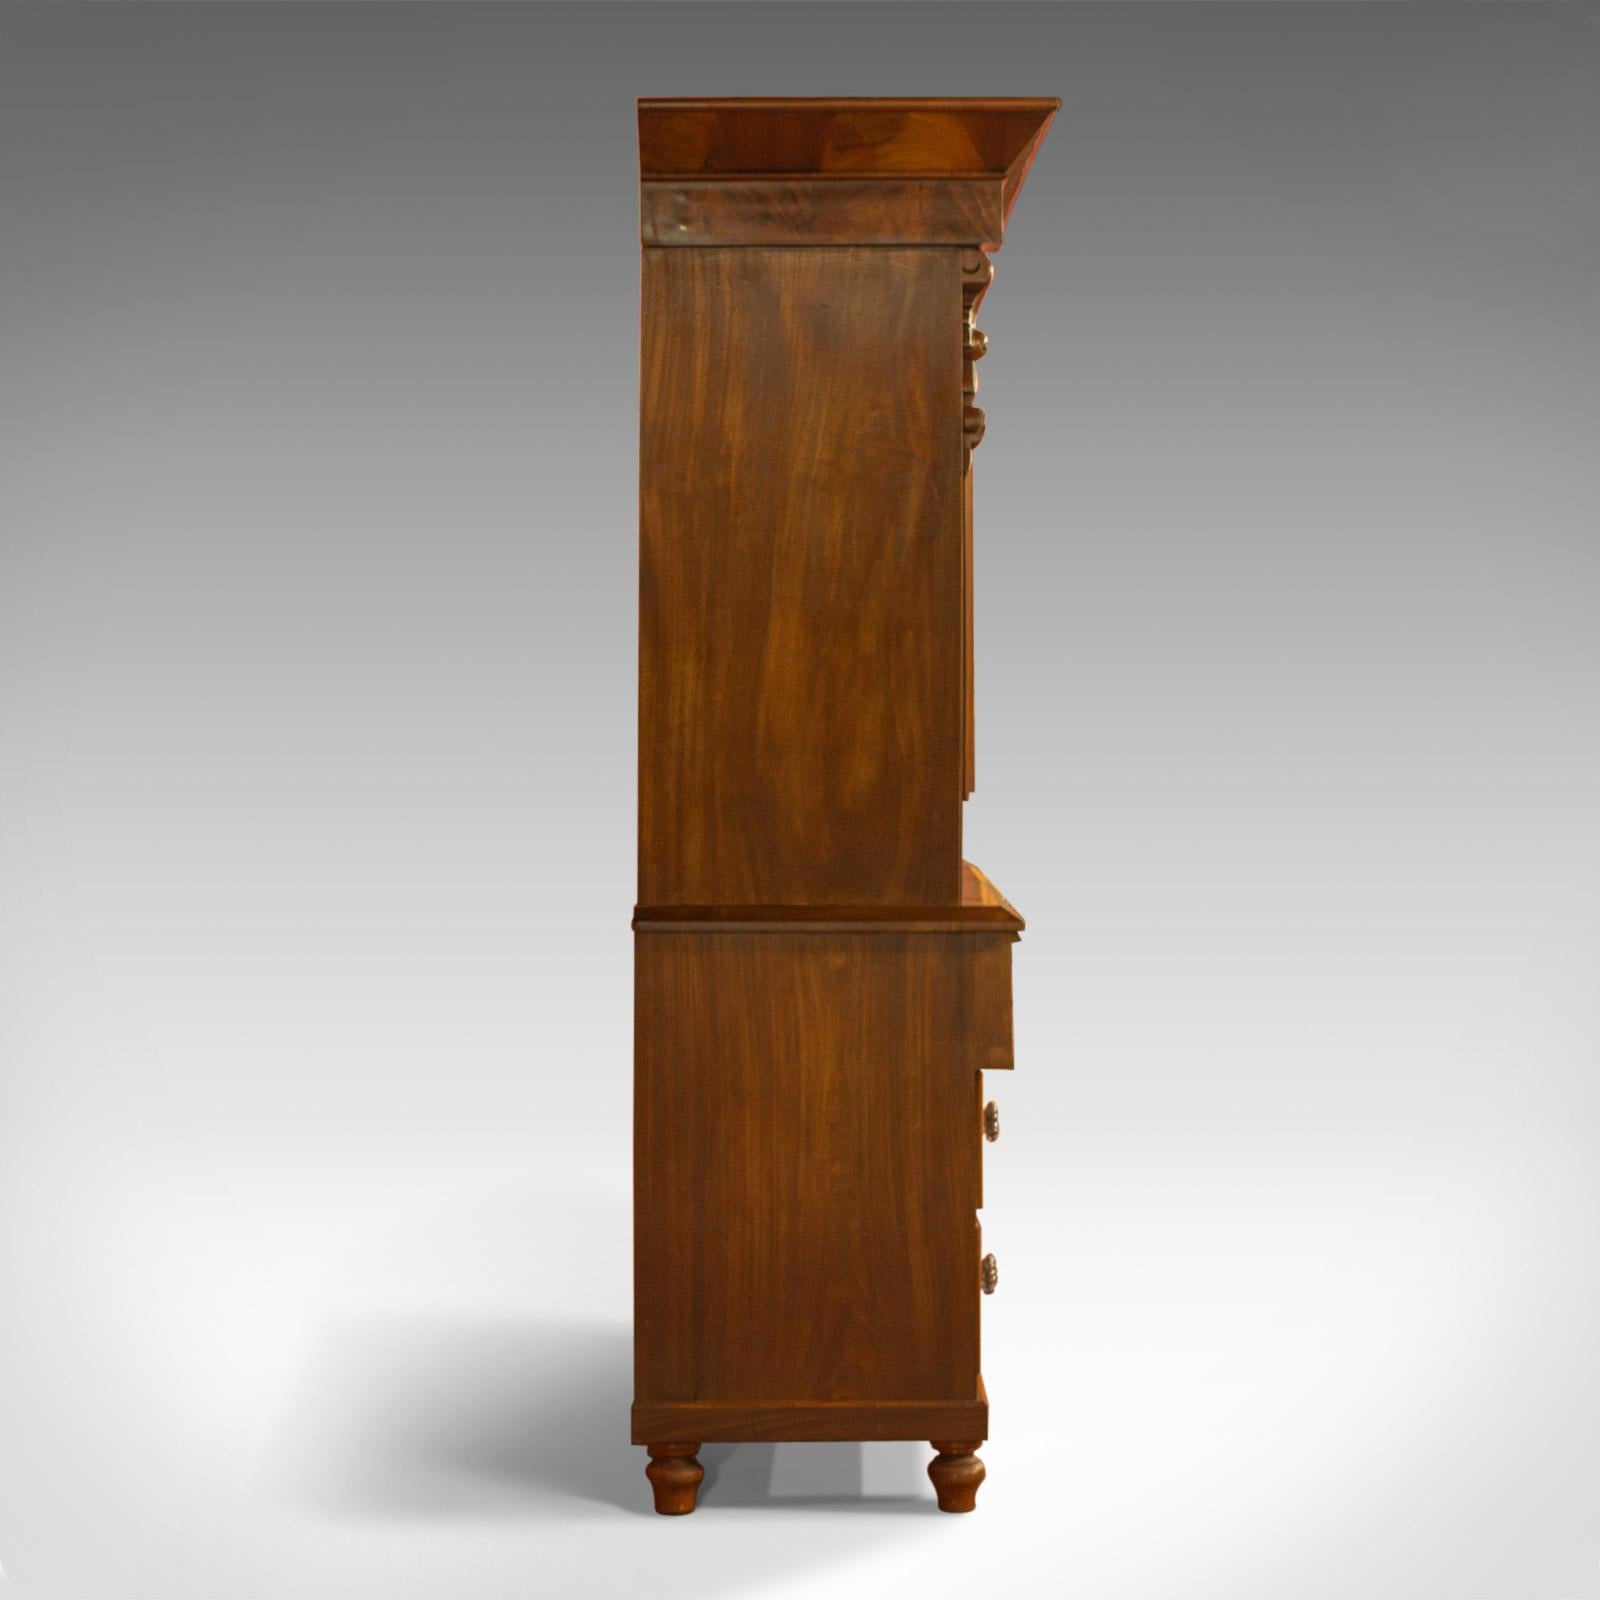 Early Victorian Linen Press, Victorian, Housekeeper's Cupboard, Flame Mahogany, circa 1860